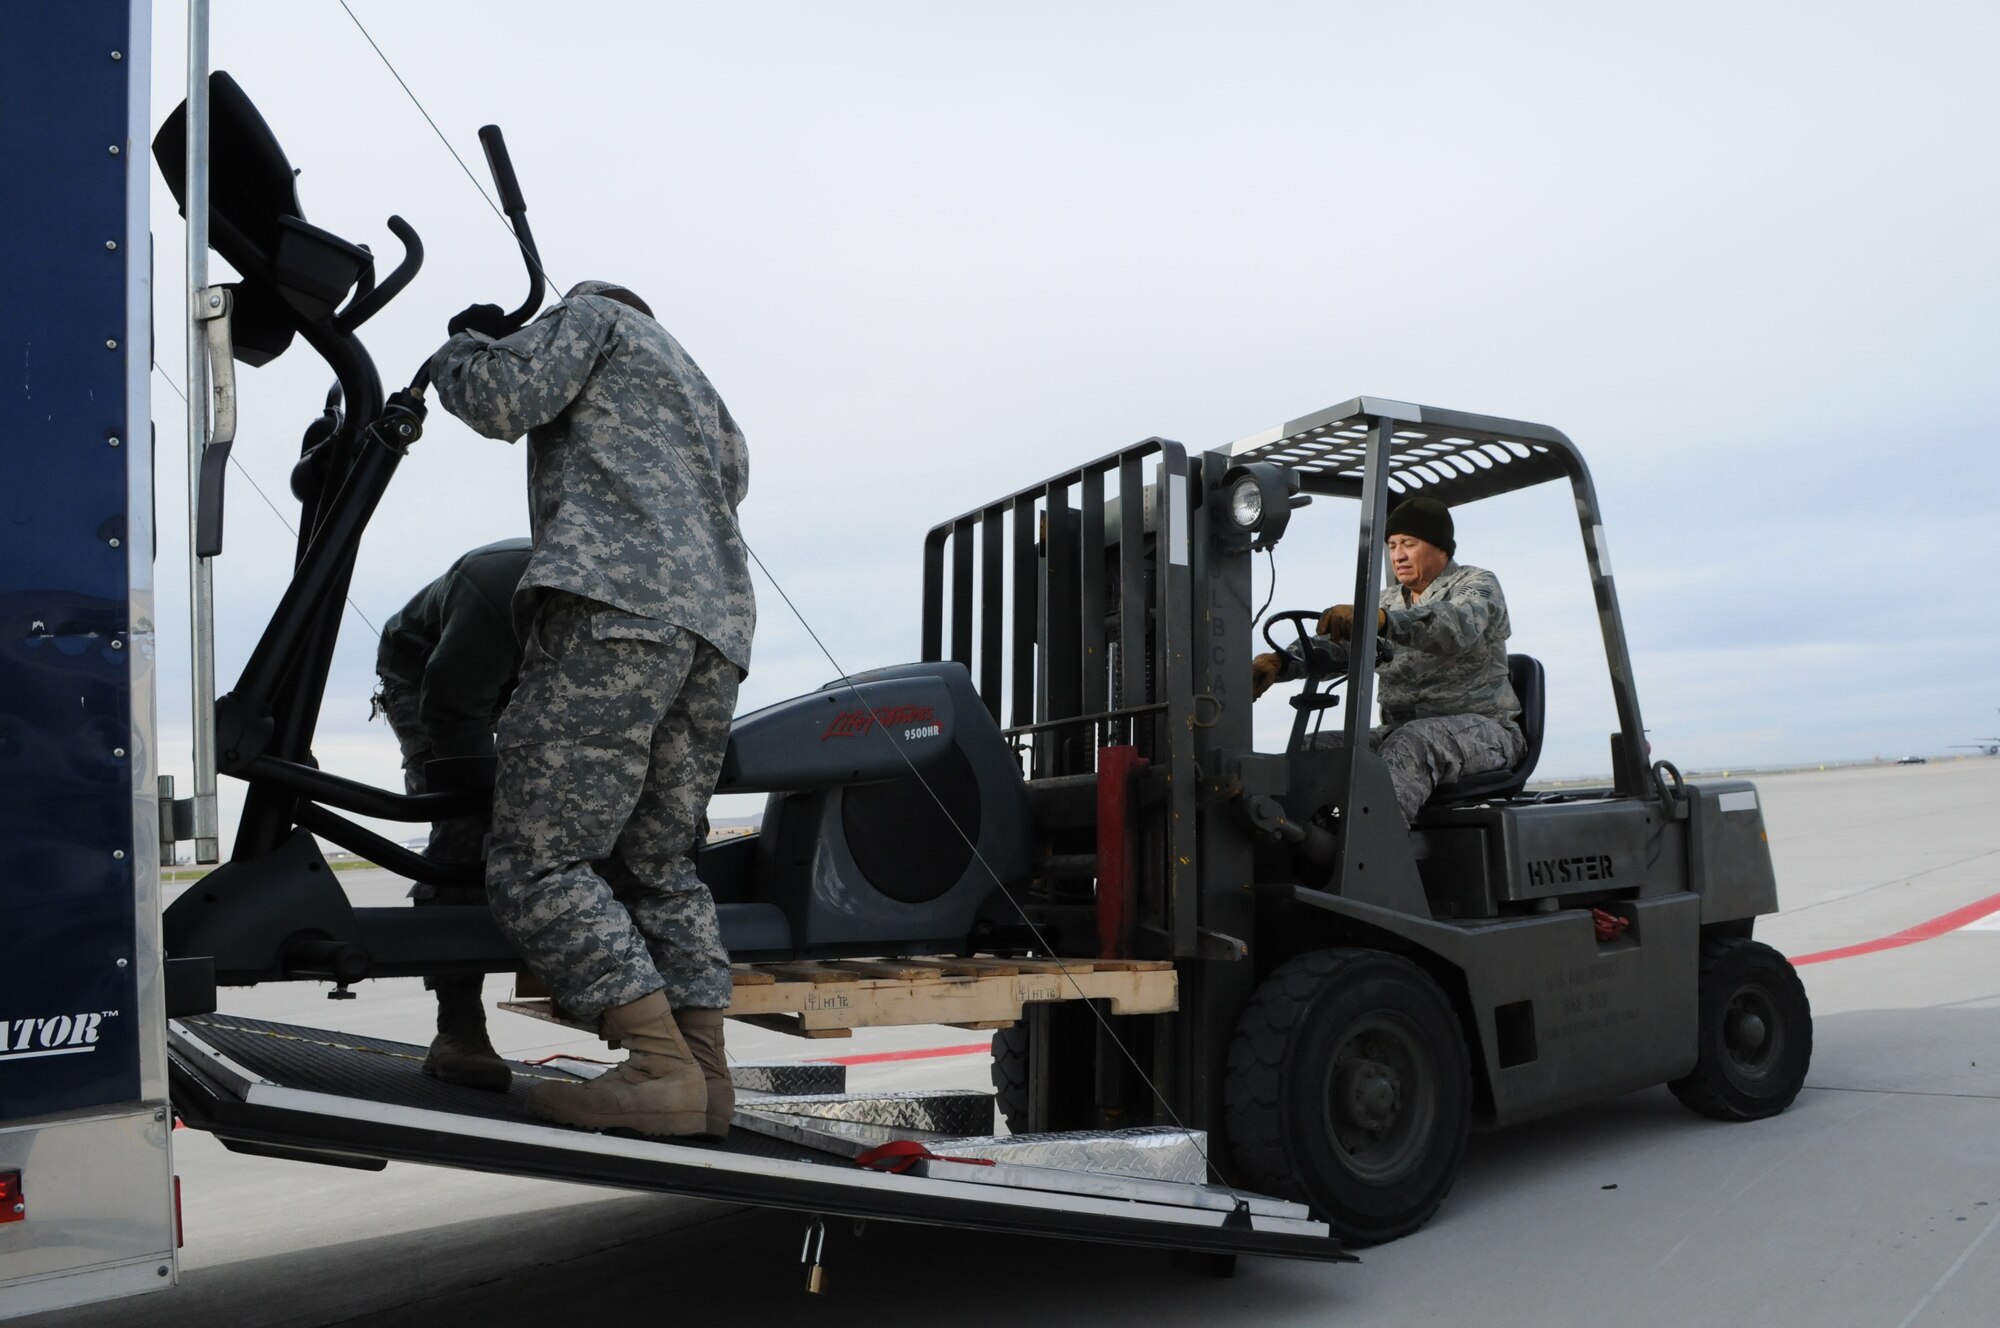 Tech. Sgt. Pascual Ramirez uses a forklift to remove old equipment from the 151st Air Refueling Wing's base gym in Salt Lake City, on Nov. 17, 2010. The base recently purchased $112,000 worth of new equipment to replace older eqipment, enhancing the ability of Airmen to maintain top physical conditioning.(U.S. Air Force photo by Master Sgt. Gary J. Rihn)(RELEASED)